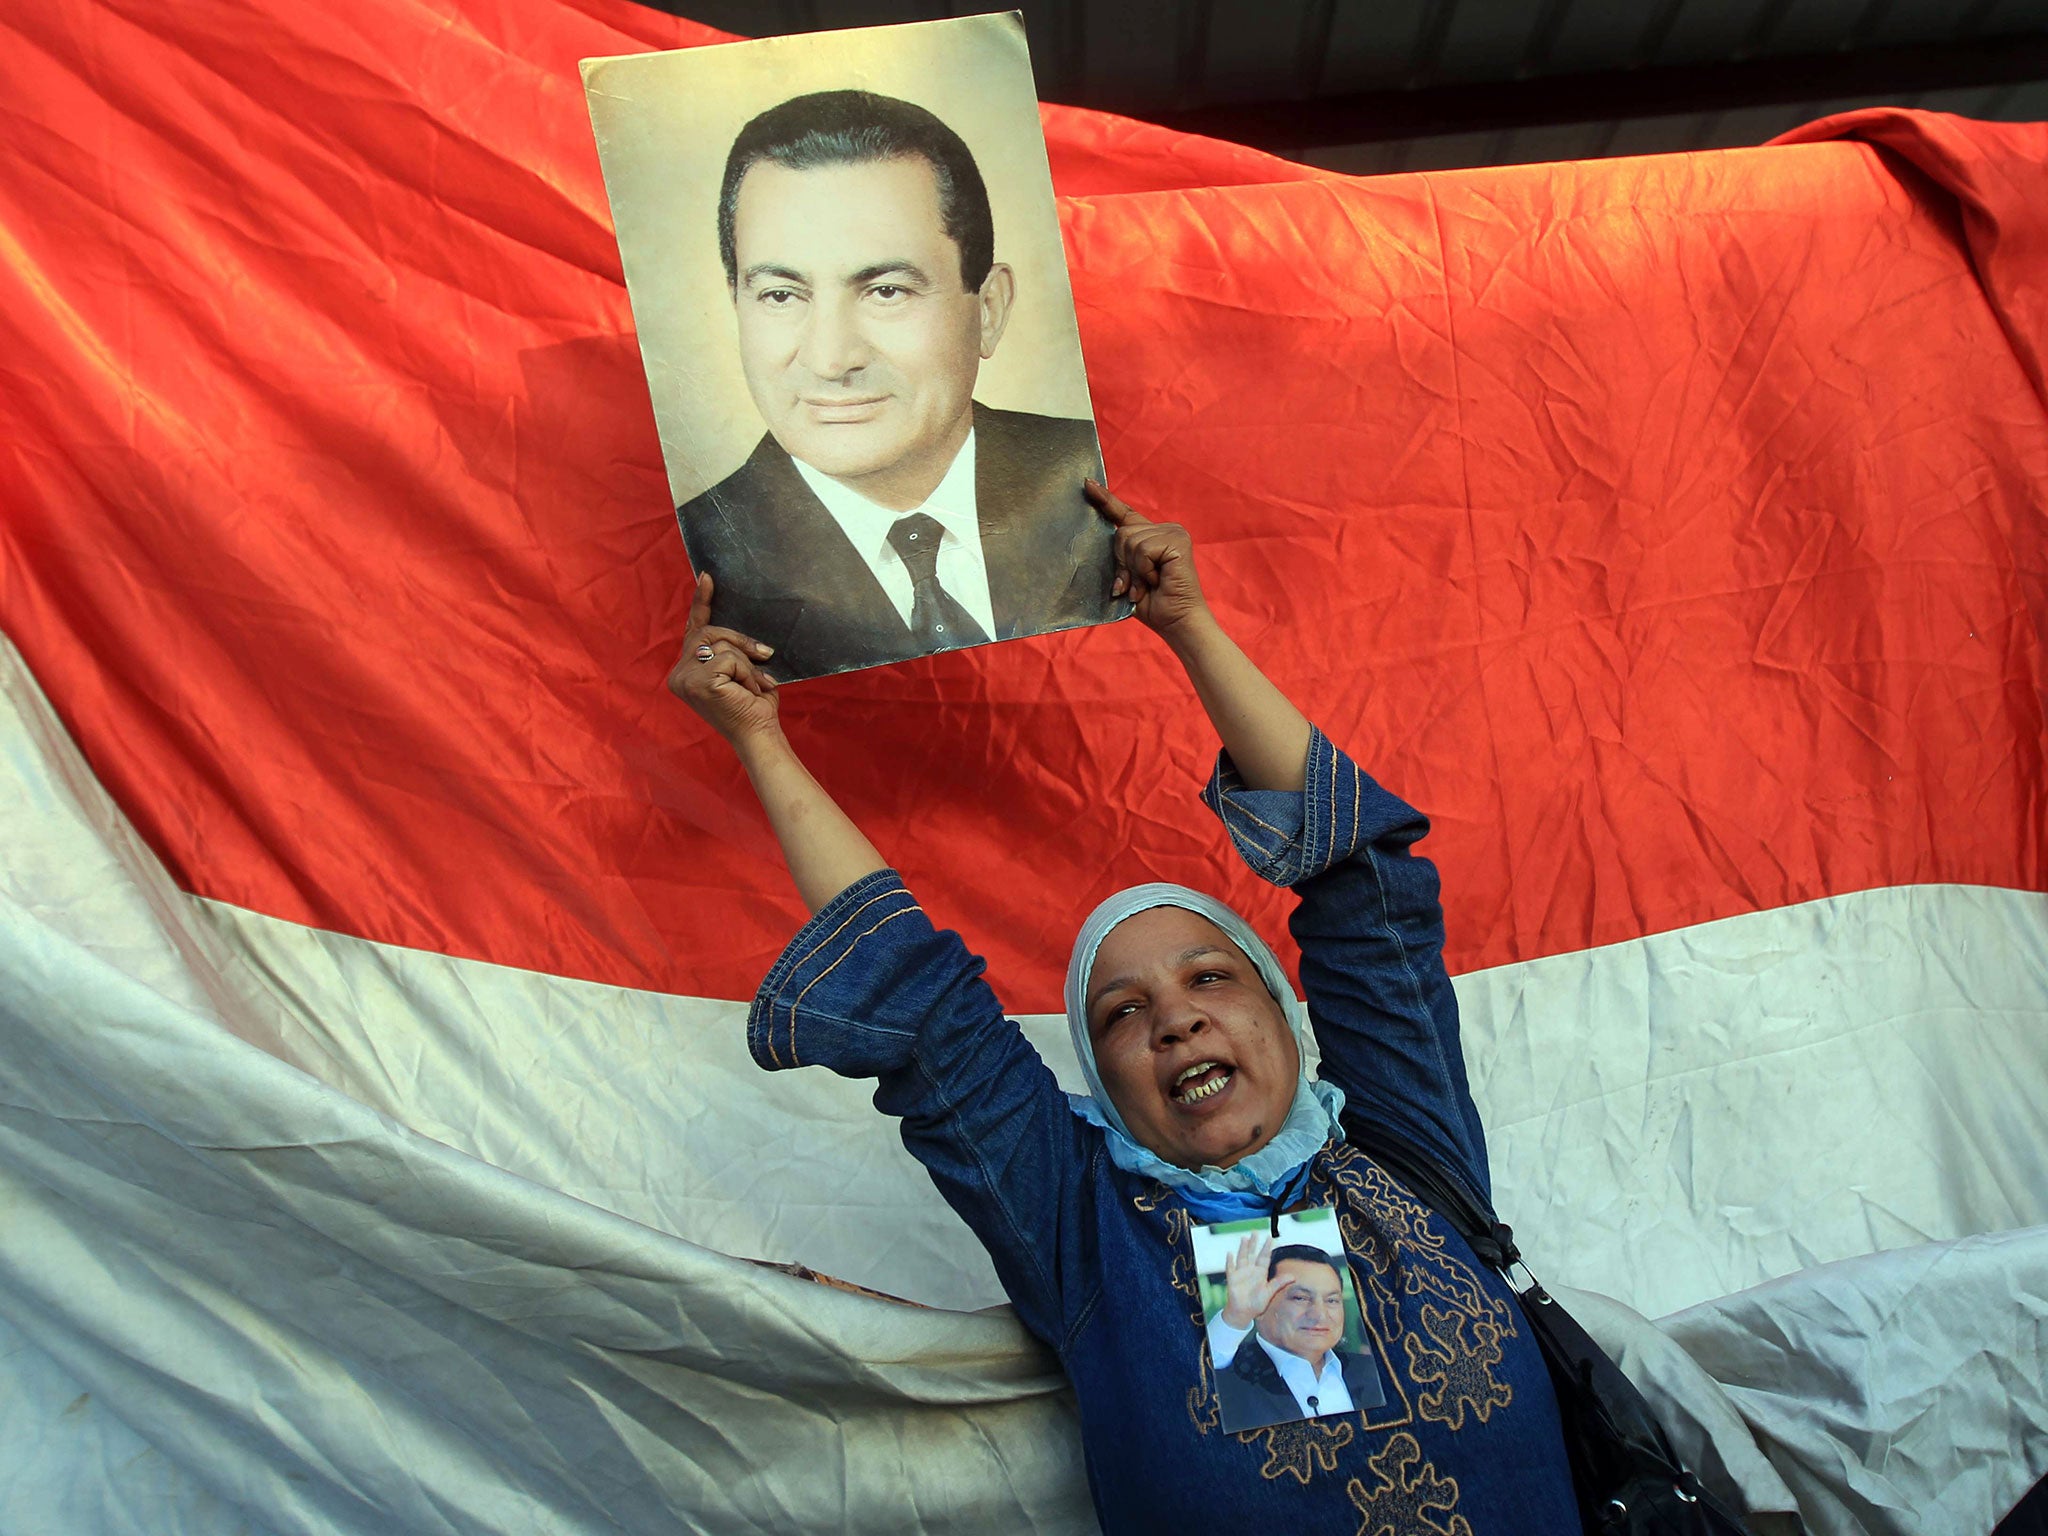 Mubarak's National Democratic Party was dissolved following the uprising that toppled him in 2011